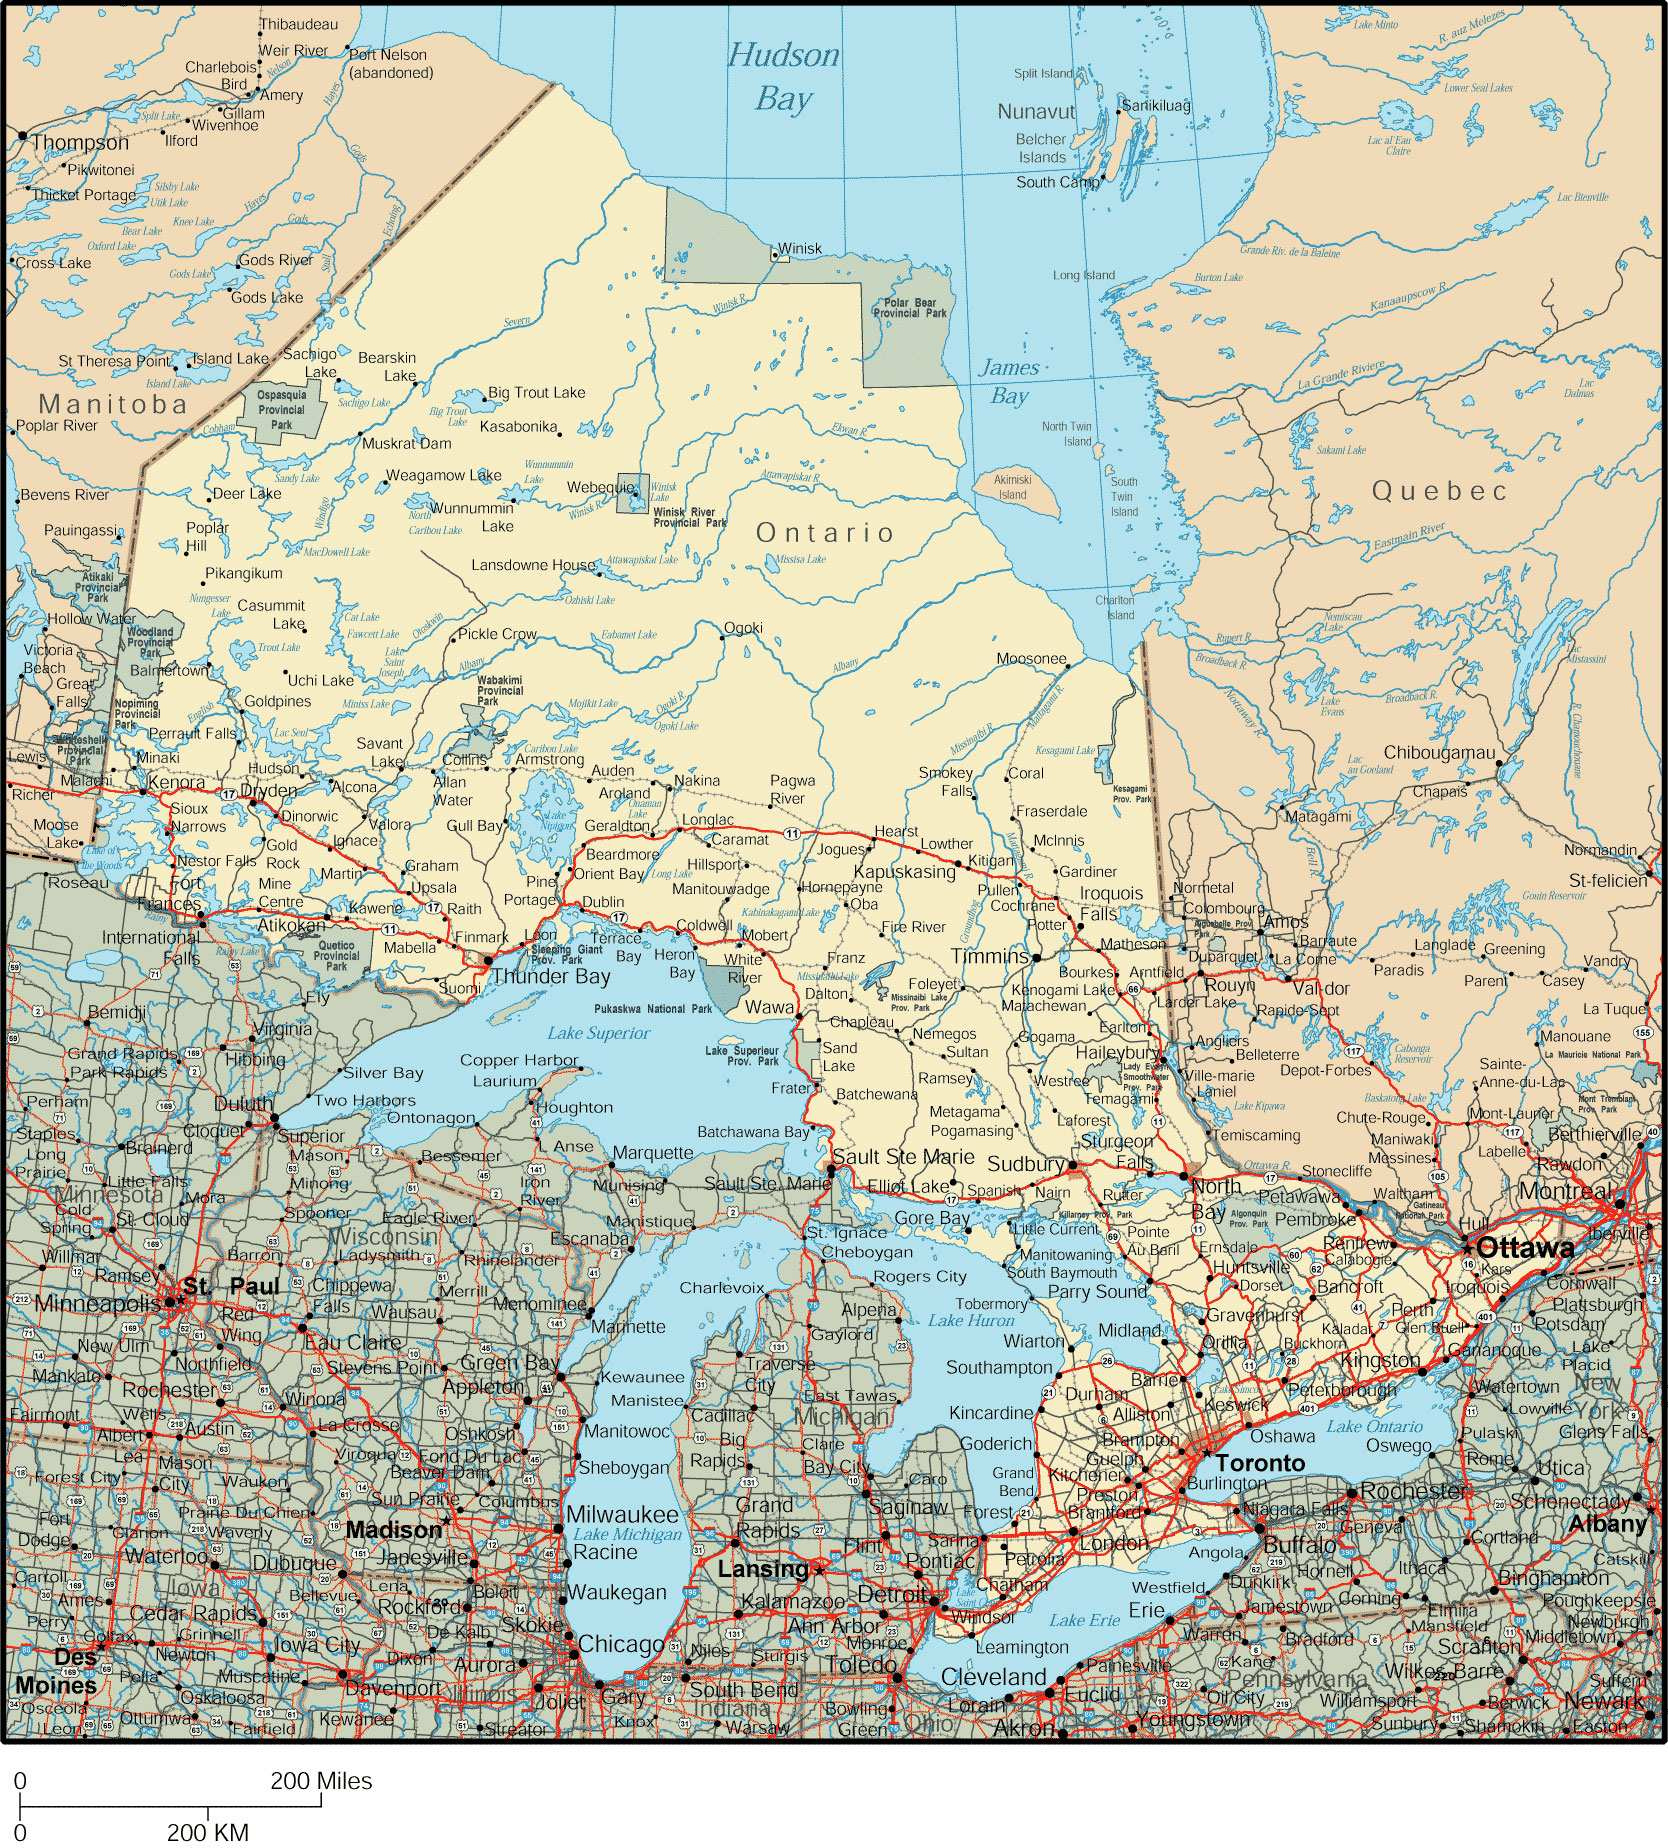 Large Ontario Town Maps For Free Download And Print High Resolution 